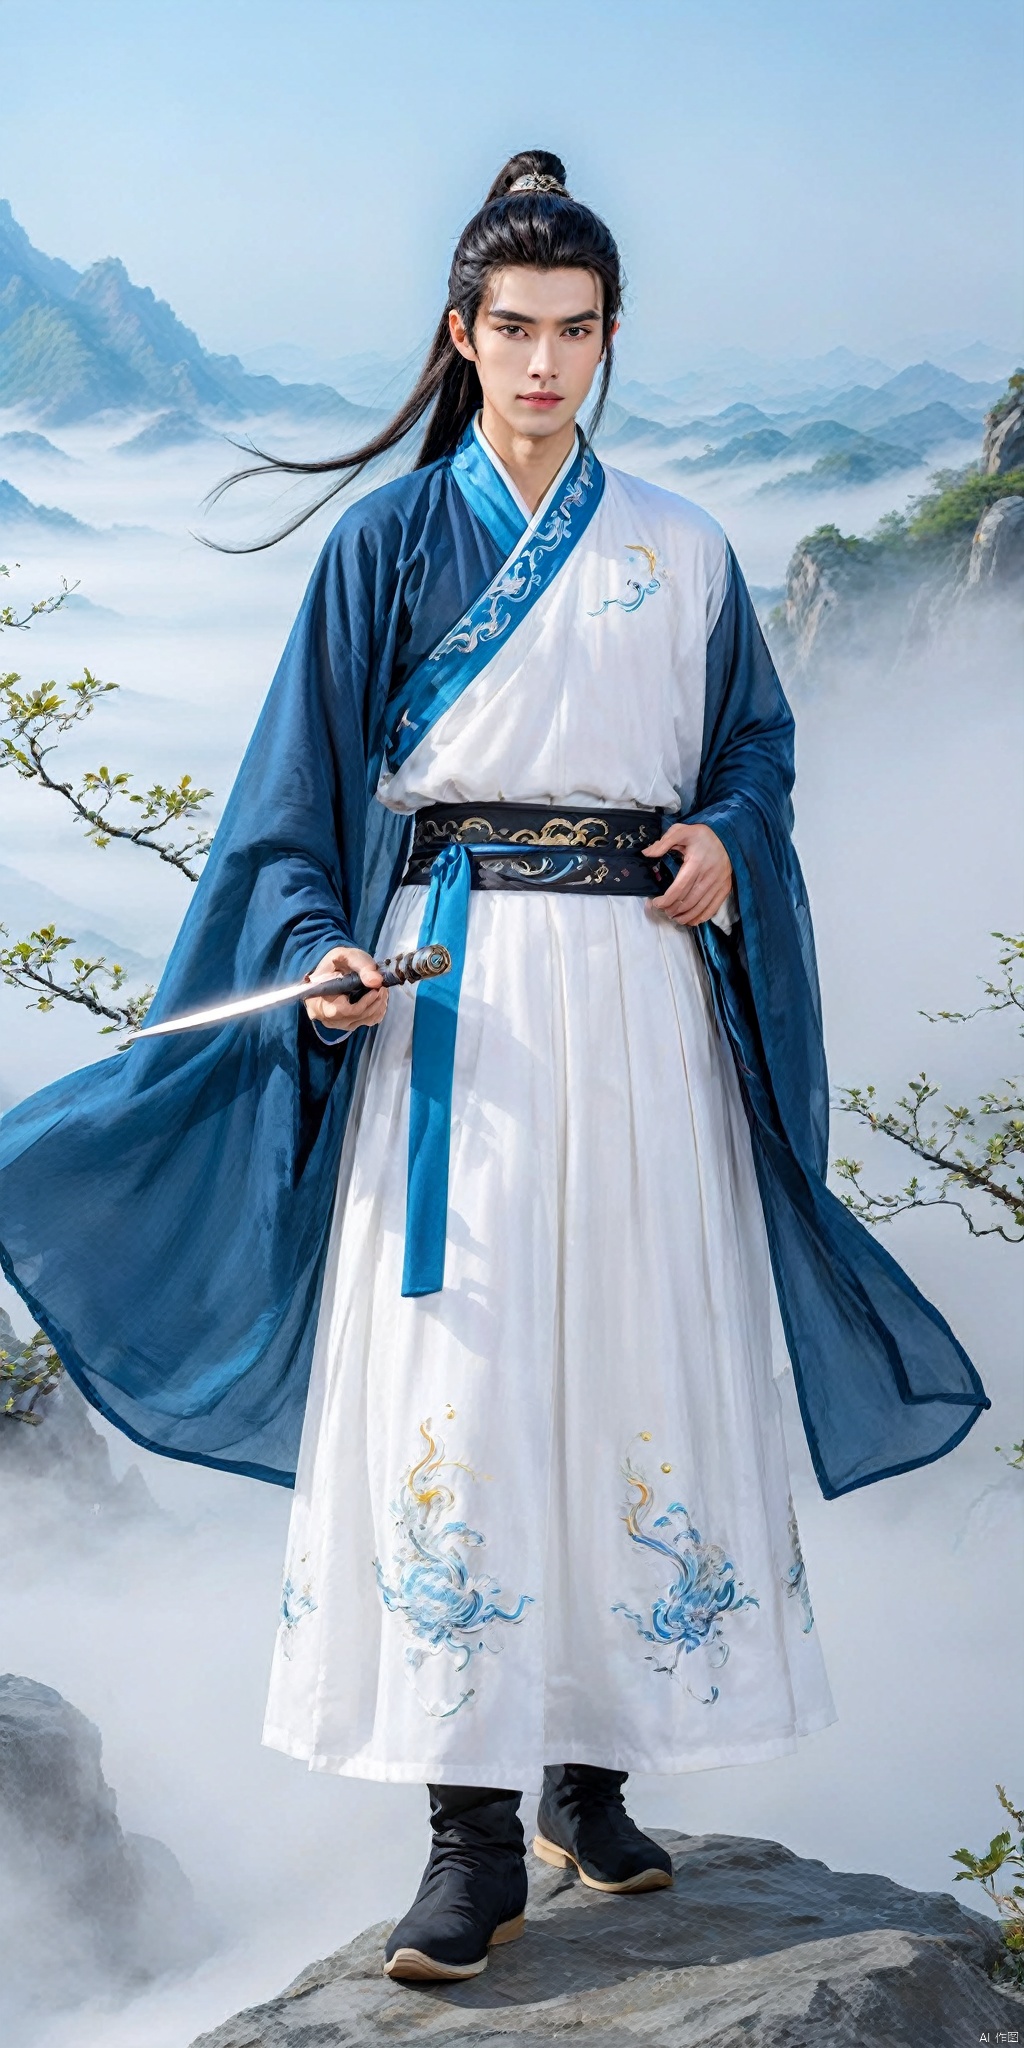 A young man of the Sword Eyebrow Star order, with white eyebrows, a white eyebrow hero, a handsome face, exquisite facial features, bright eyes, a tall and straight nose bridge, jet black hair, flowing long hair, a tall ponytail, black wrist guard, ancient style, cultivation style, blue robe, exquisite Chinese Hanfu, Chinese chivalrous cloth boots, black boots, blue sky, perfect figure, exquisite muscles, holding a large knife, exquisite Chinese big knife, Standing on the mountaintop, shrouded in clouds and mist, sparkling with electric light, ink style, master level work, movie stills, high-definition picture quality, 24K, HanFu Man, 666K